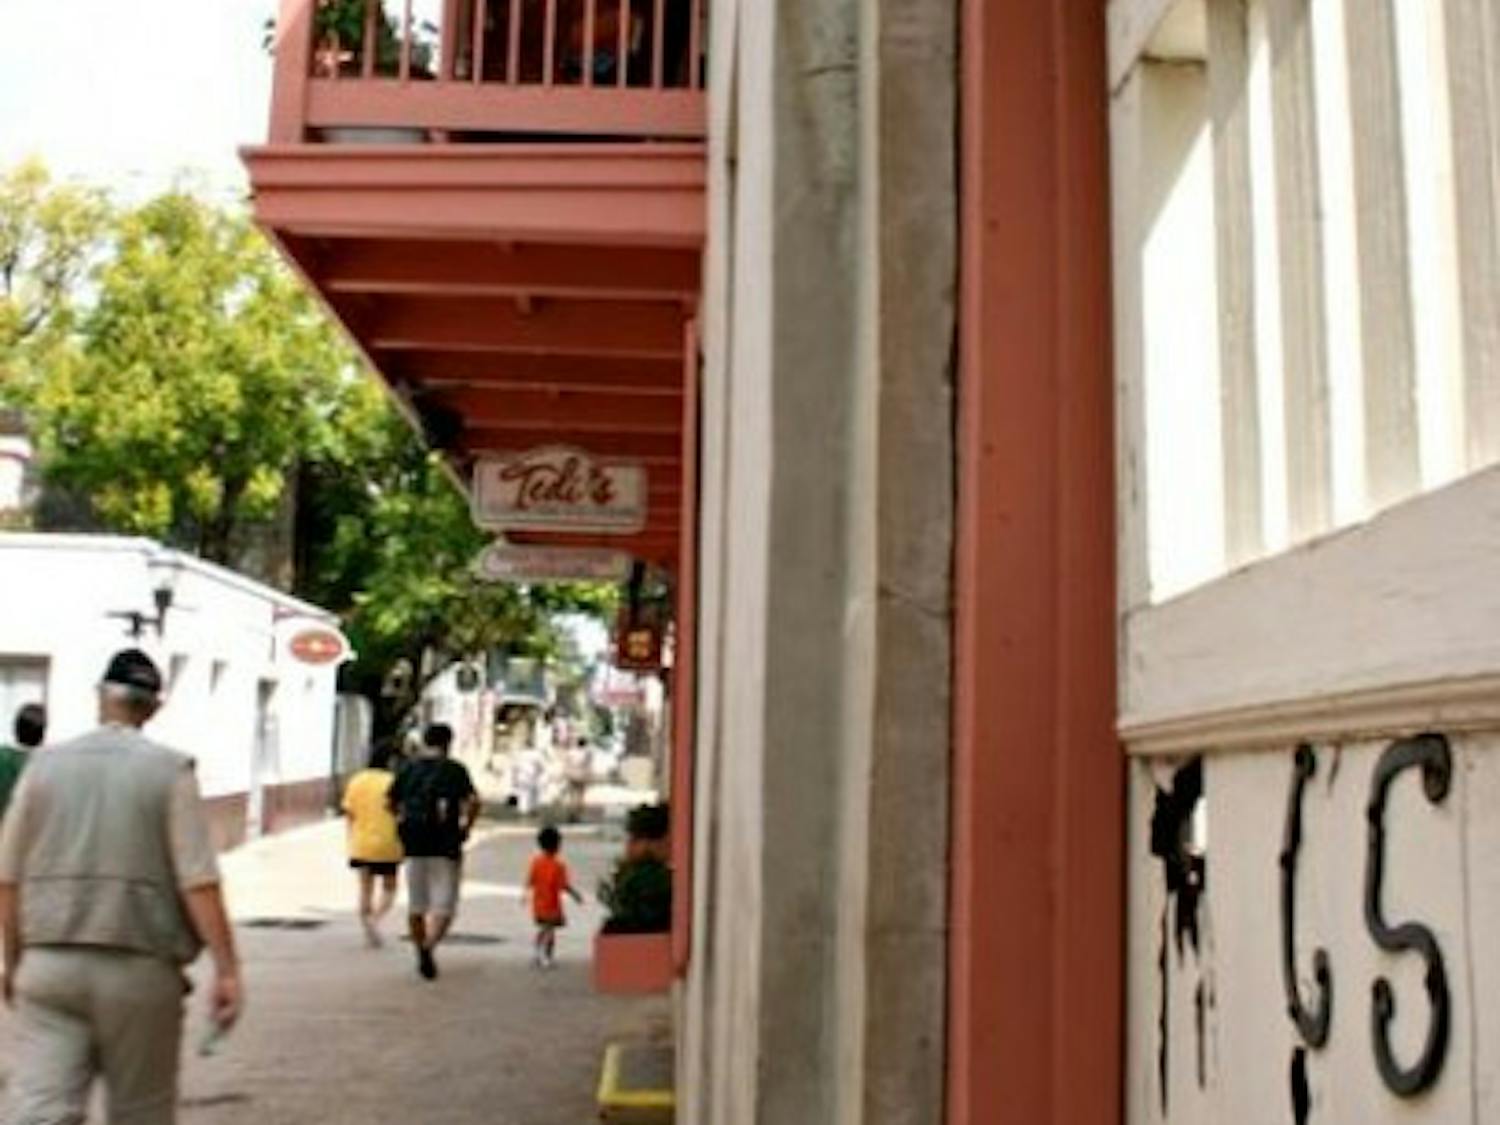 People walk past the Benet House, now Tedi's Olde Tyme Ice Cream, in downtown St. Augustine on a Tuesday afternoon in September 2008.&nbsp;